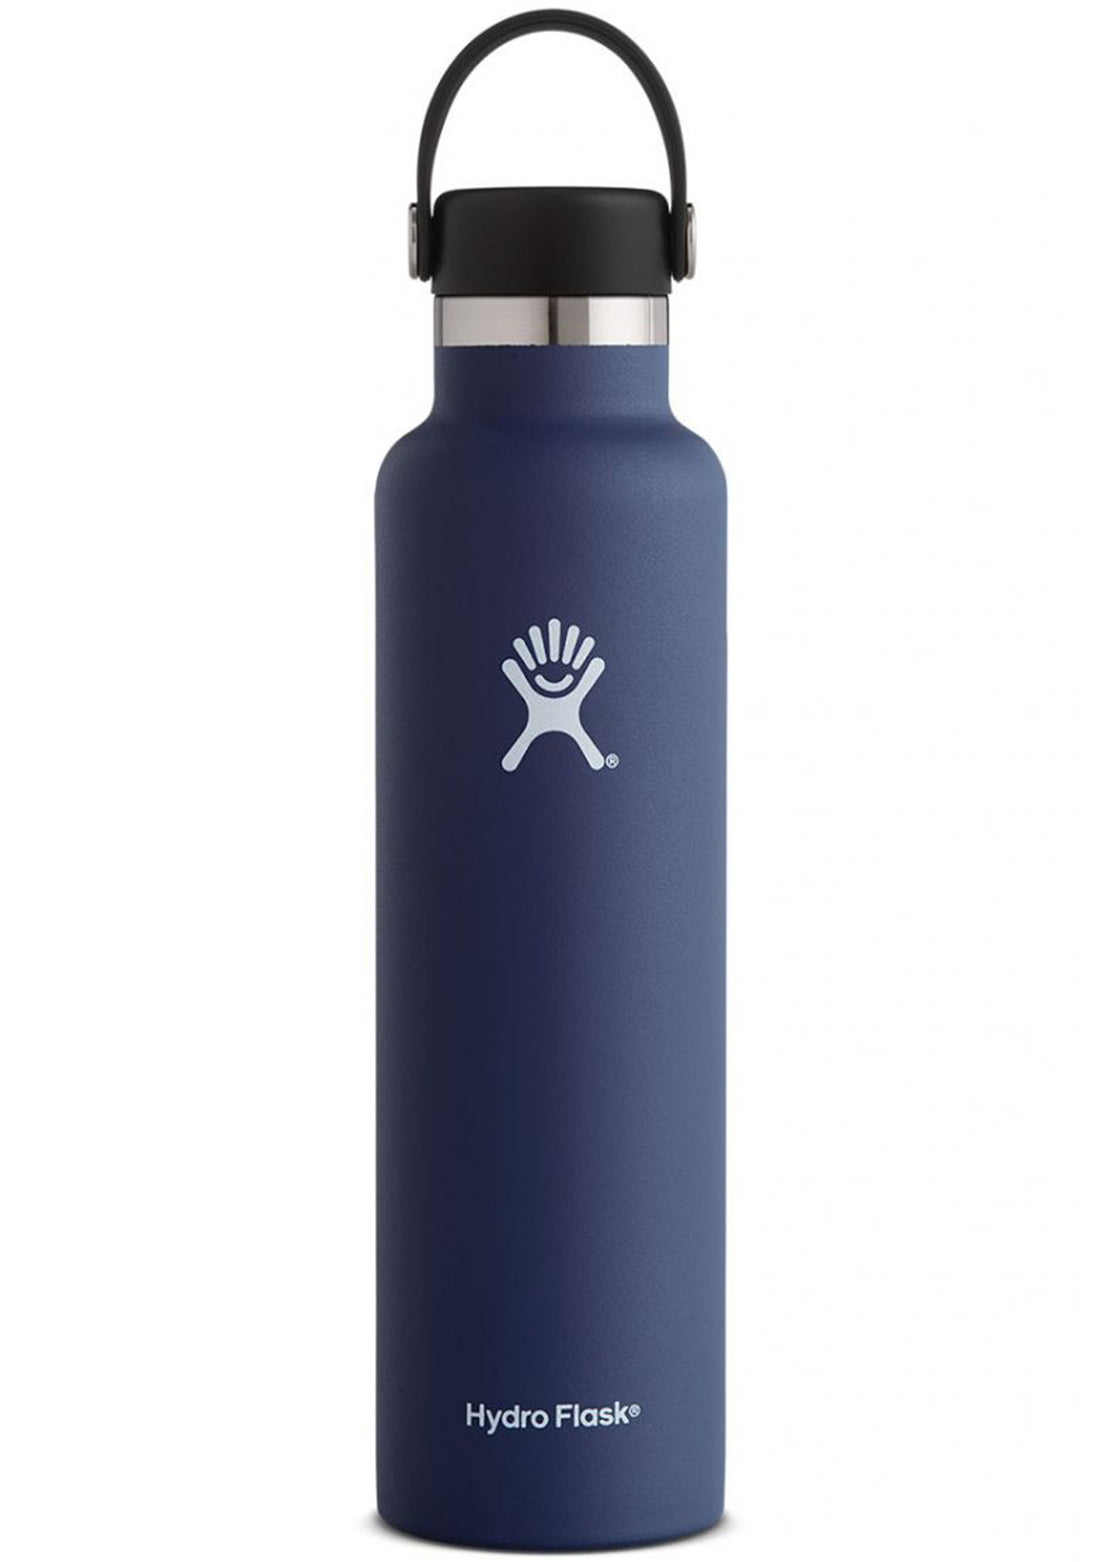 Hydro Flask 24oz Standard Mouth Insulated Bottle Cobalt